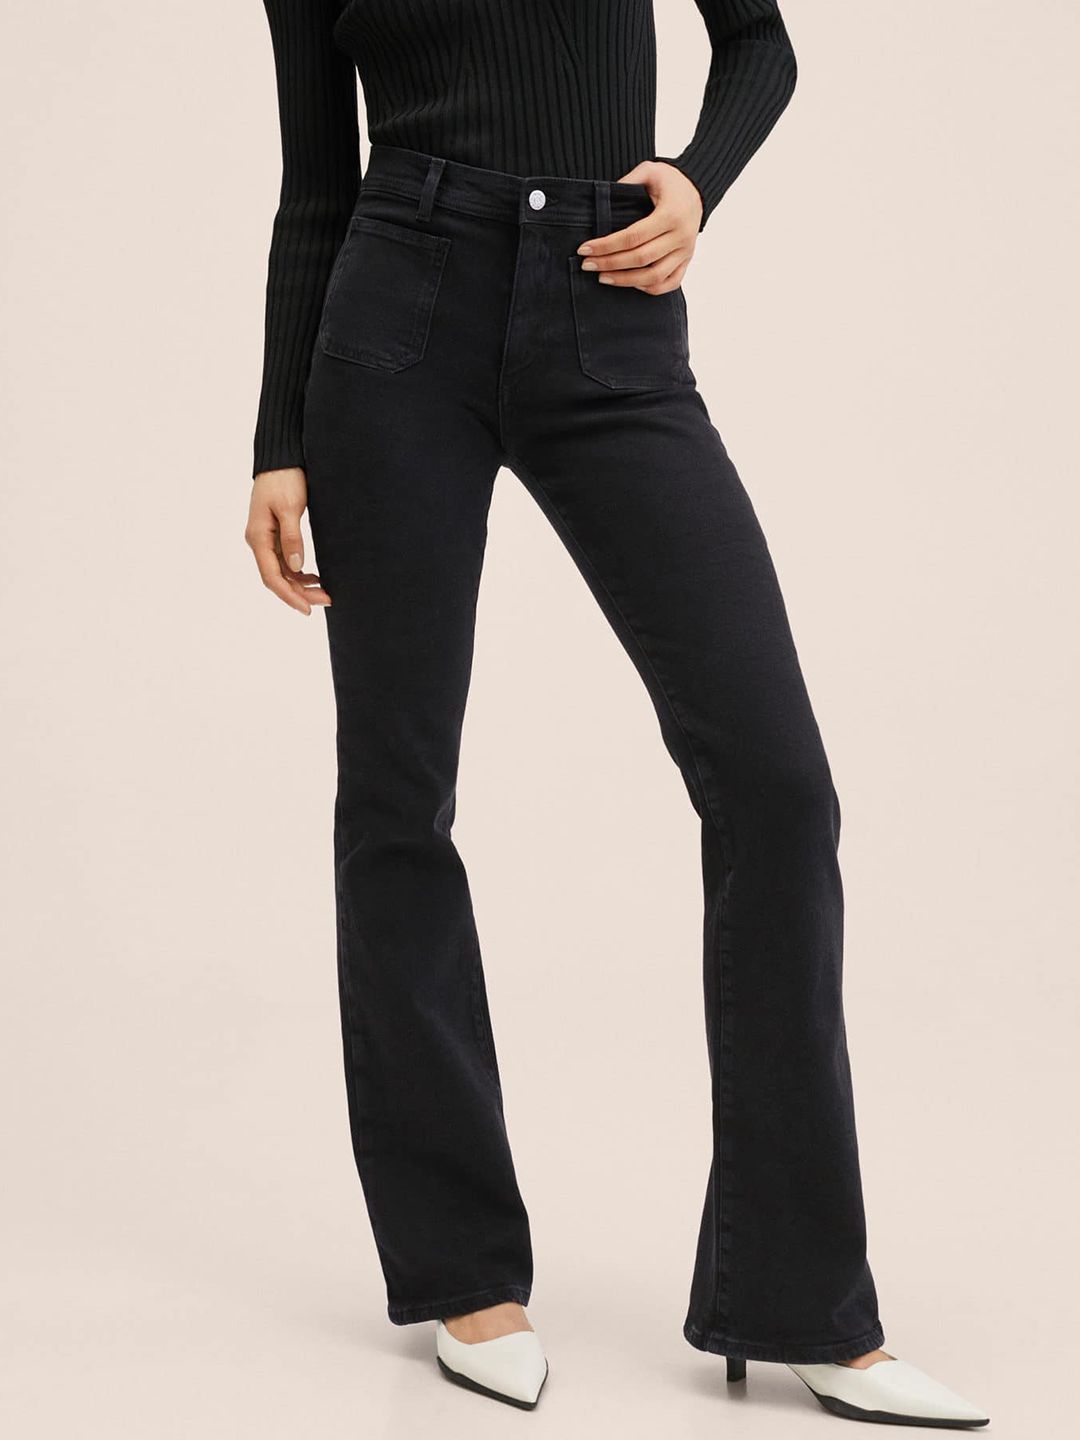 MANGO Women Black Flared Fit Stretchable Jeans Price in India